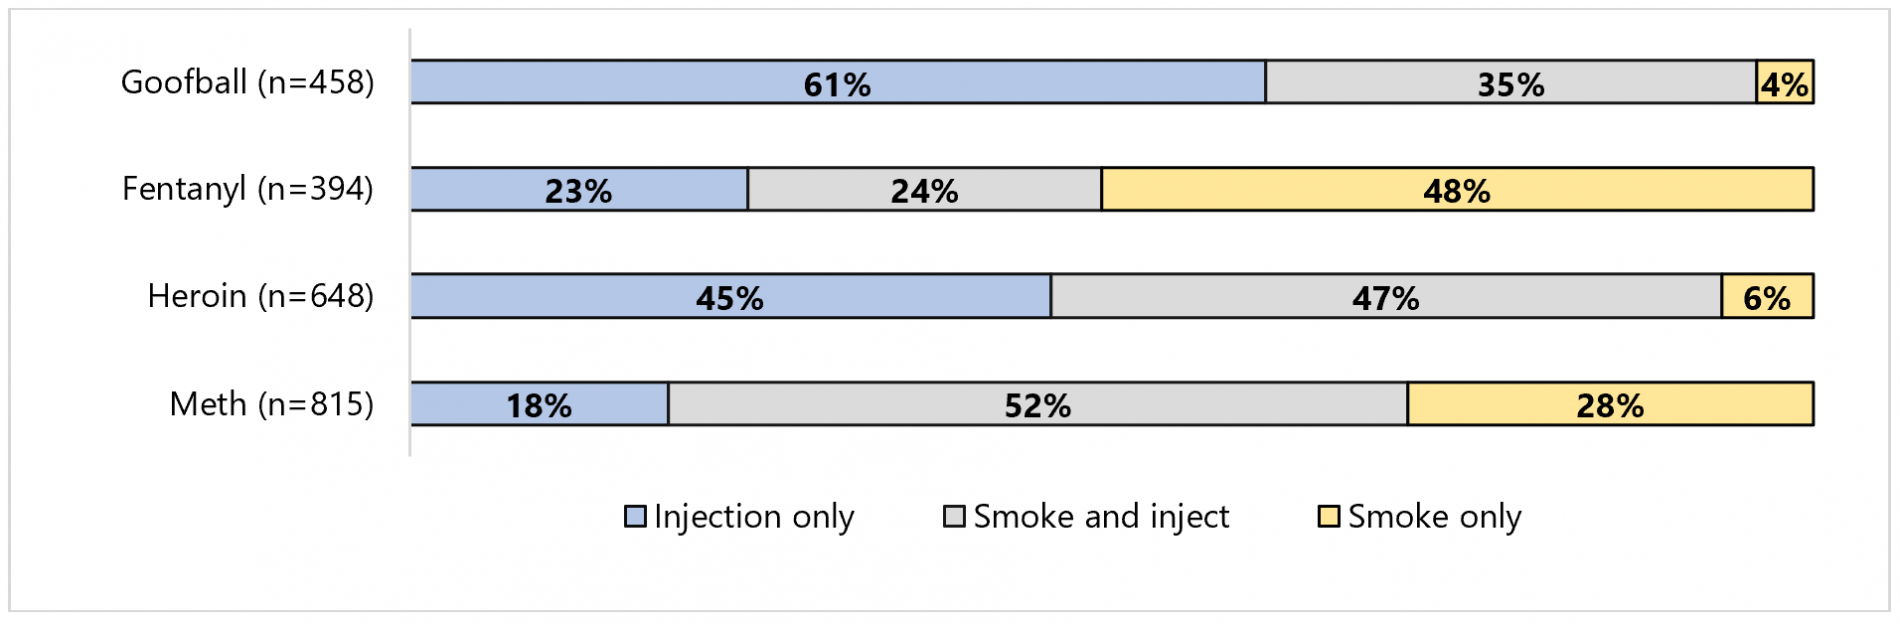 Graph showing 4 drugs and how they were ingested: Goofball (n=458), 61% injection only, 35% smoke and inject, 4% smoke only. Fentanyl (n=394), 23% injection, 24% smoke and inject, 48% smoke. Heroin (n=648) 45% injection, 47% both, 6% smoke. Meth (n=815) 18% injection, 52% both, 28% smoke